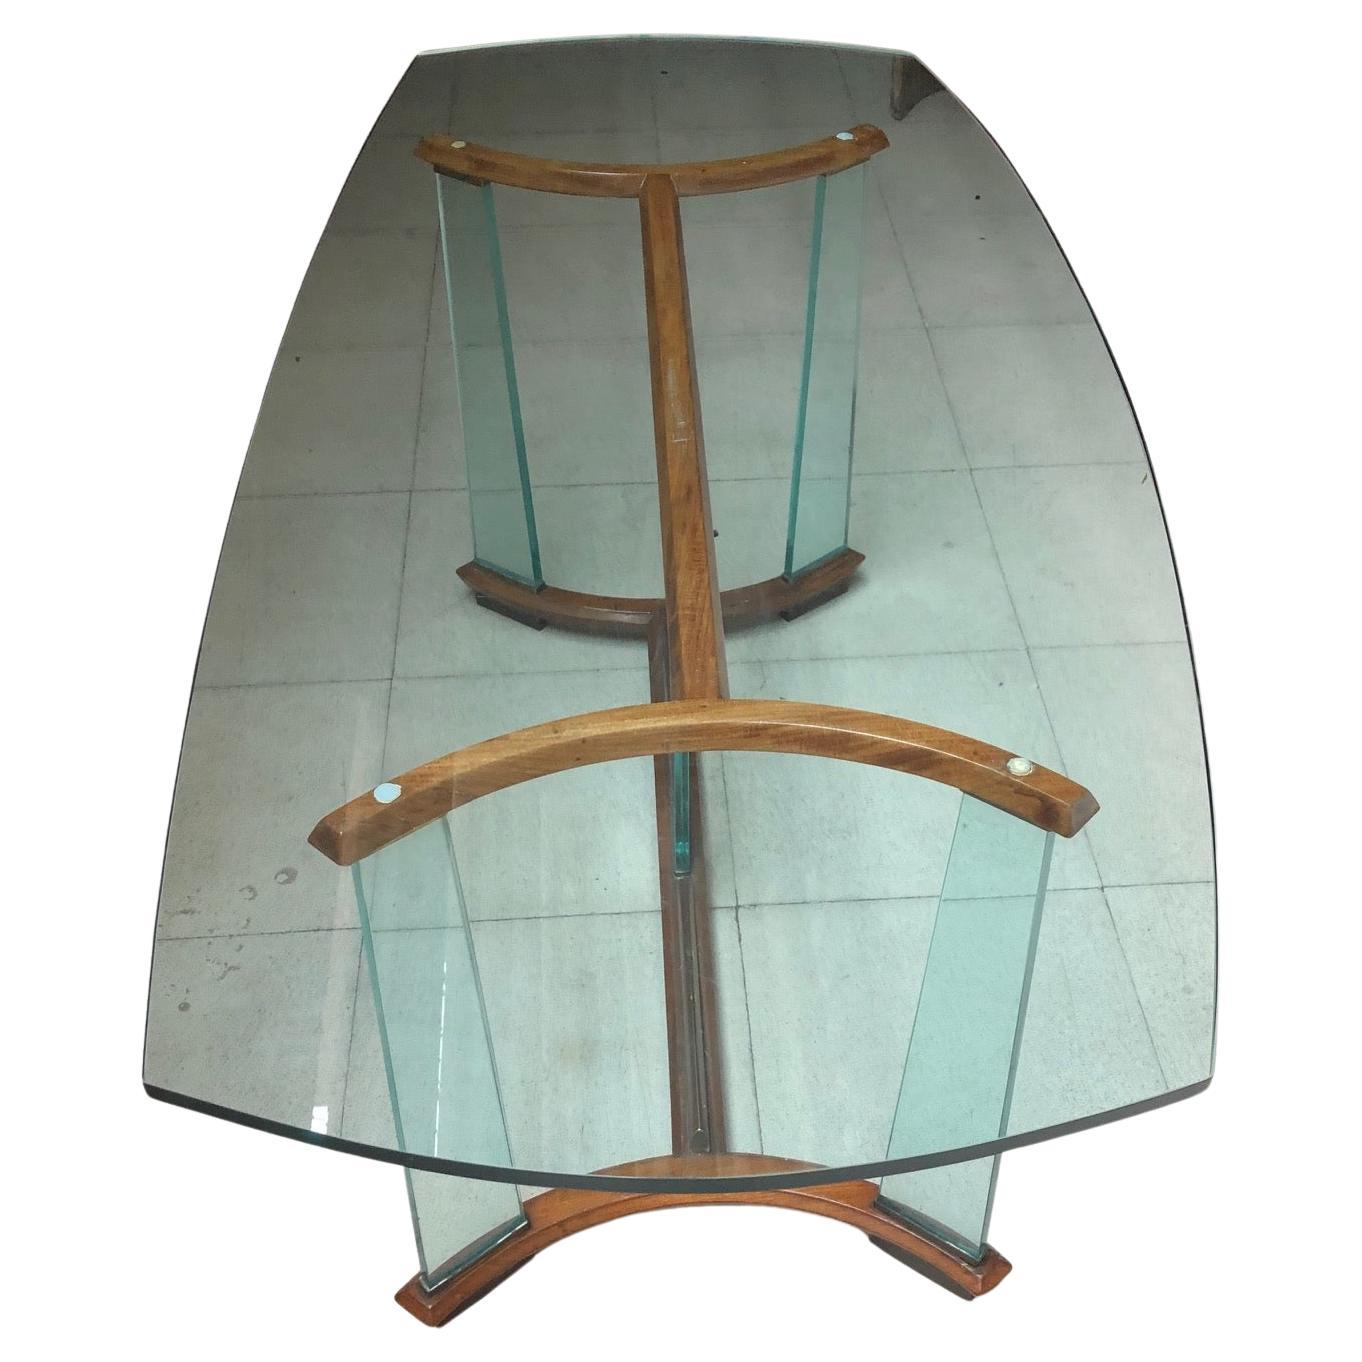 Dining table Art Deco

Year: 1950
Country: Italian
wood, Bronze and glass
It is an elegant and sophisticated dining table.
You want to live in the golden years, this is the dining table that your project needs.
We have specialized in the sale